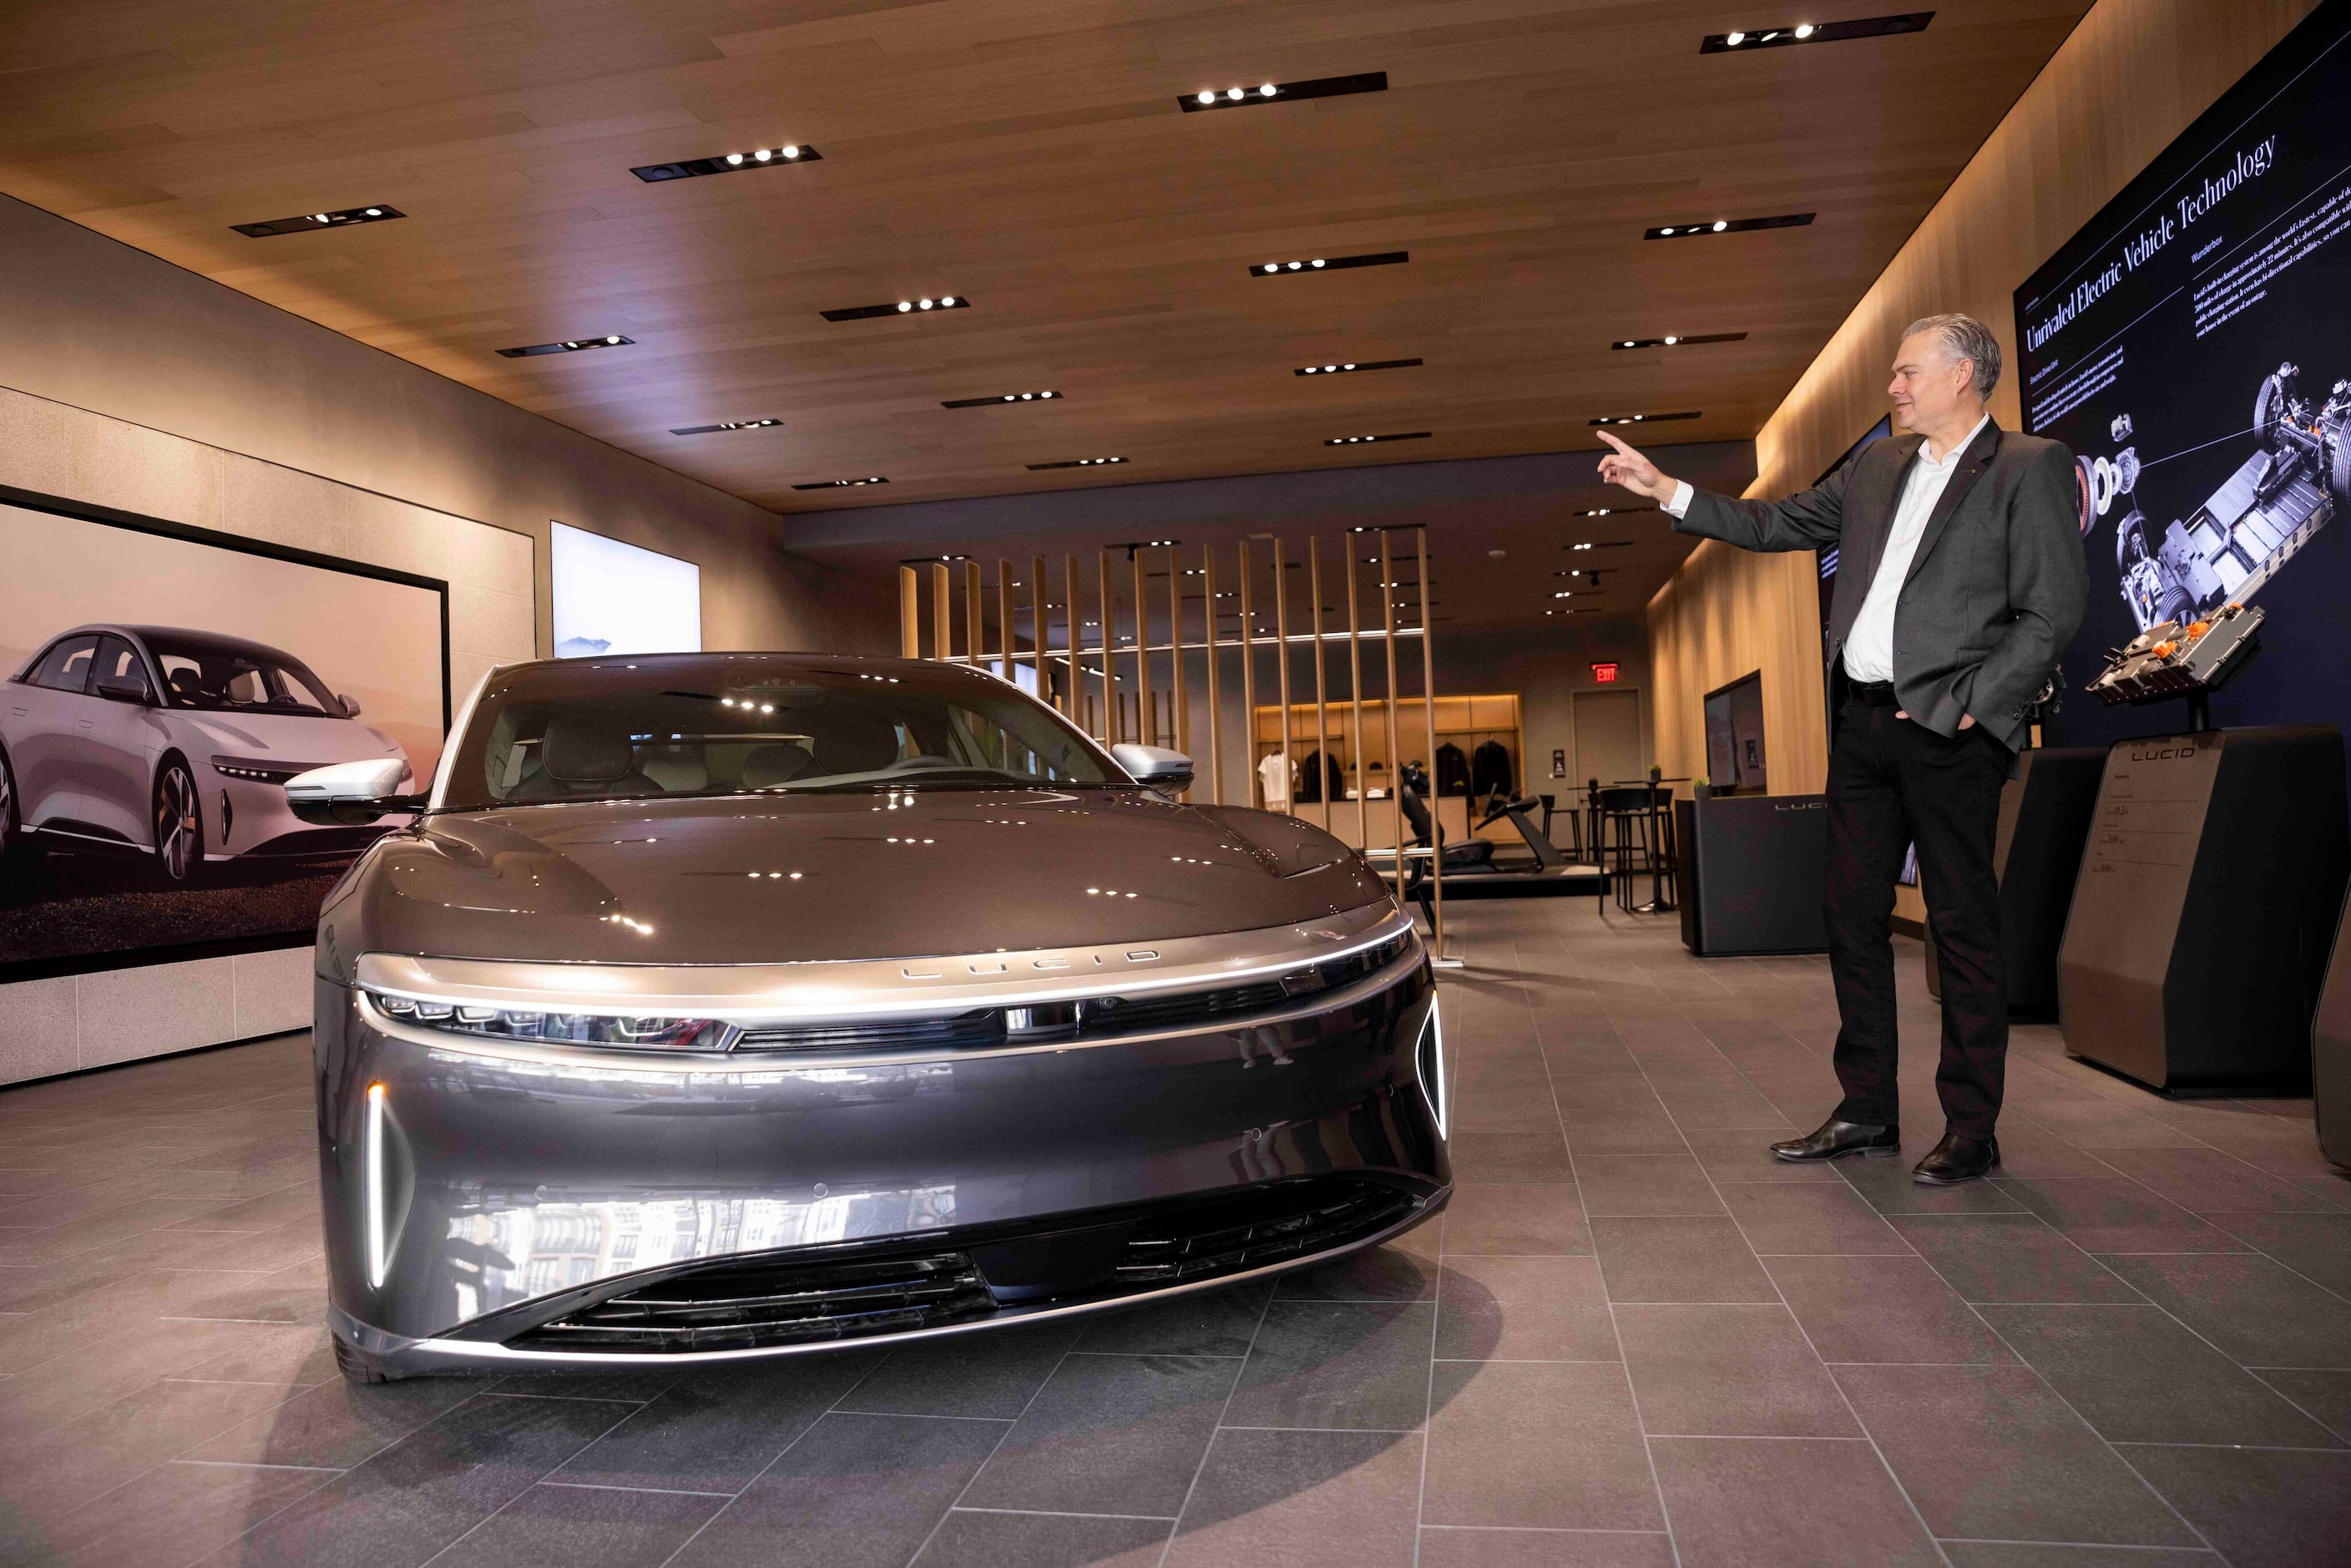 Lucid Motors Opens First Retail Studio Location in Texas, the Dallas Studio  at Legacy West